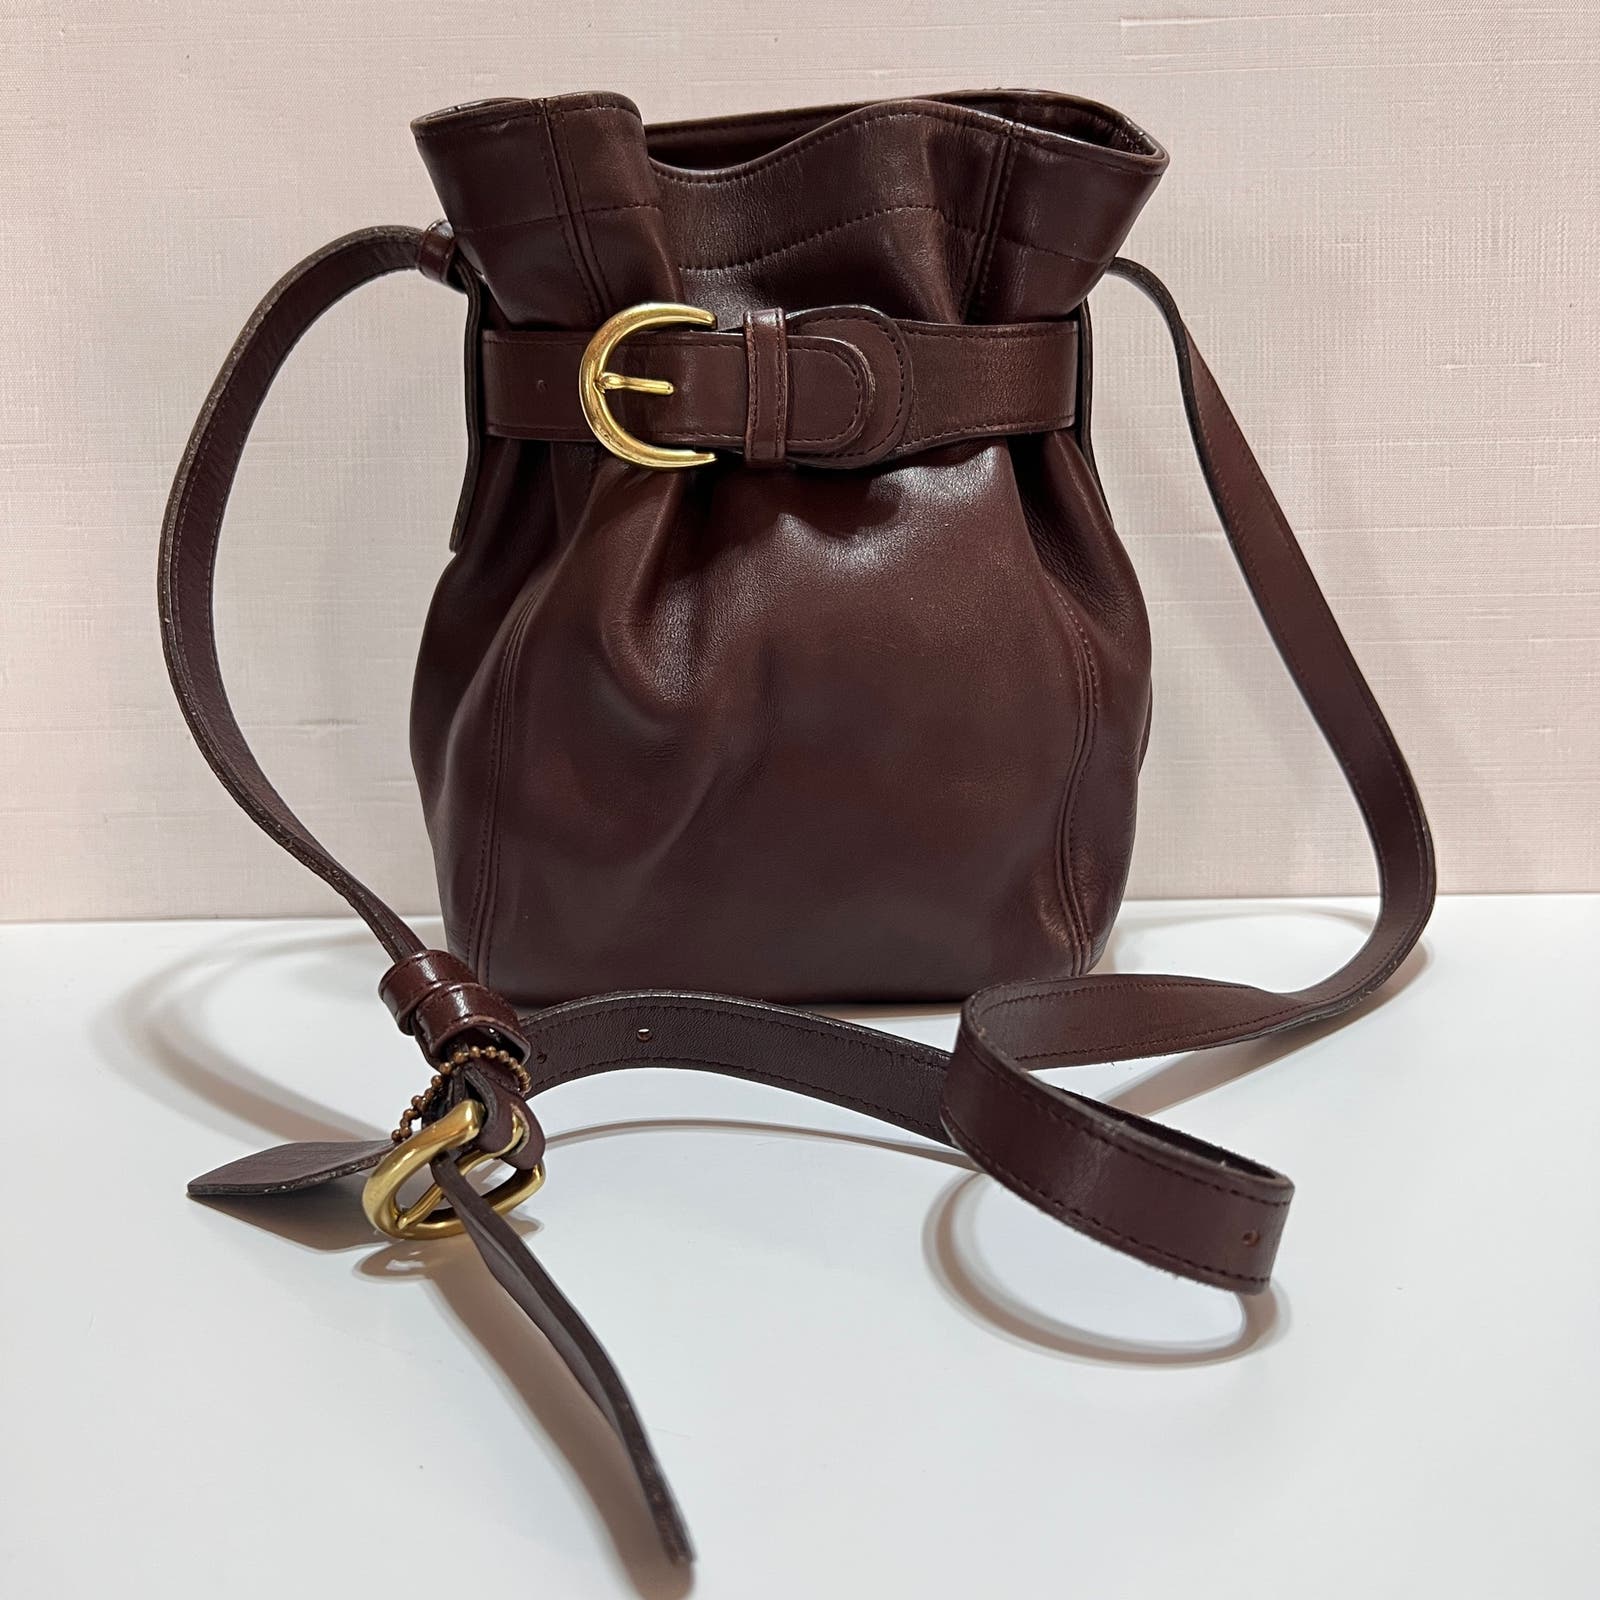 Vintage 90s Coach SOHO Brown Leather Belted Pouch Bucket Bag Purse  Crossbody | eBay